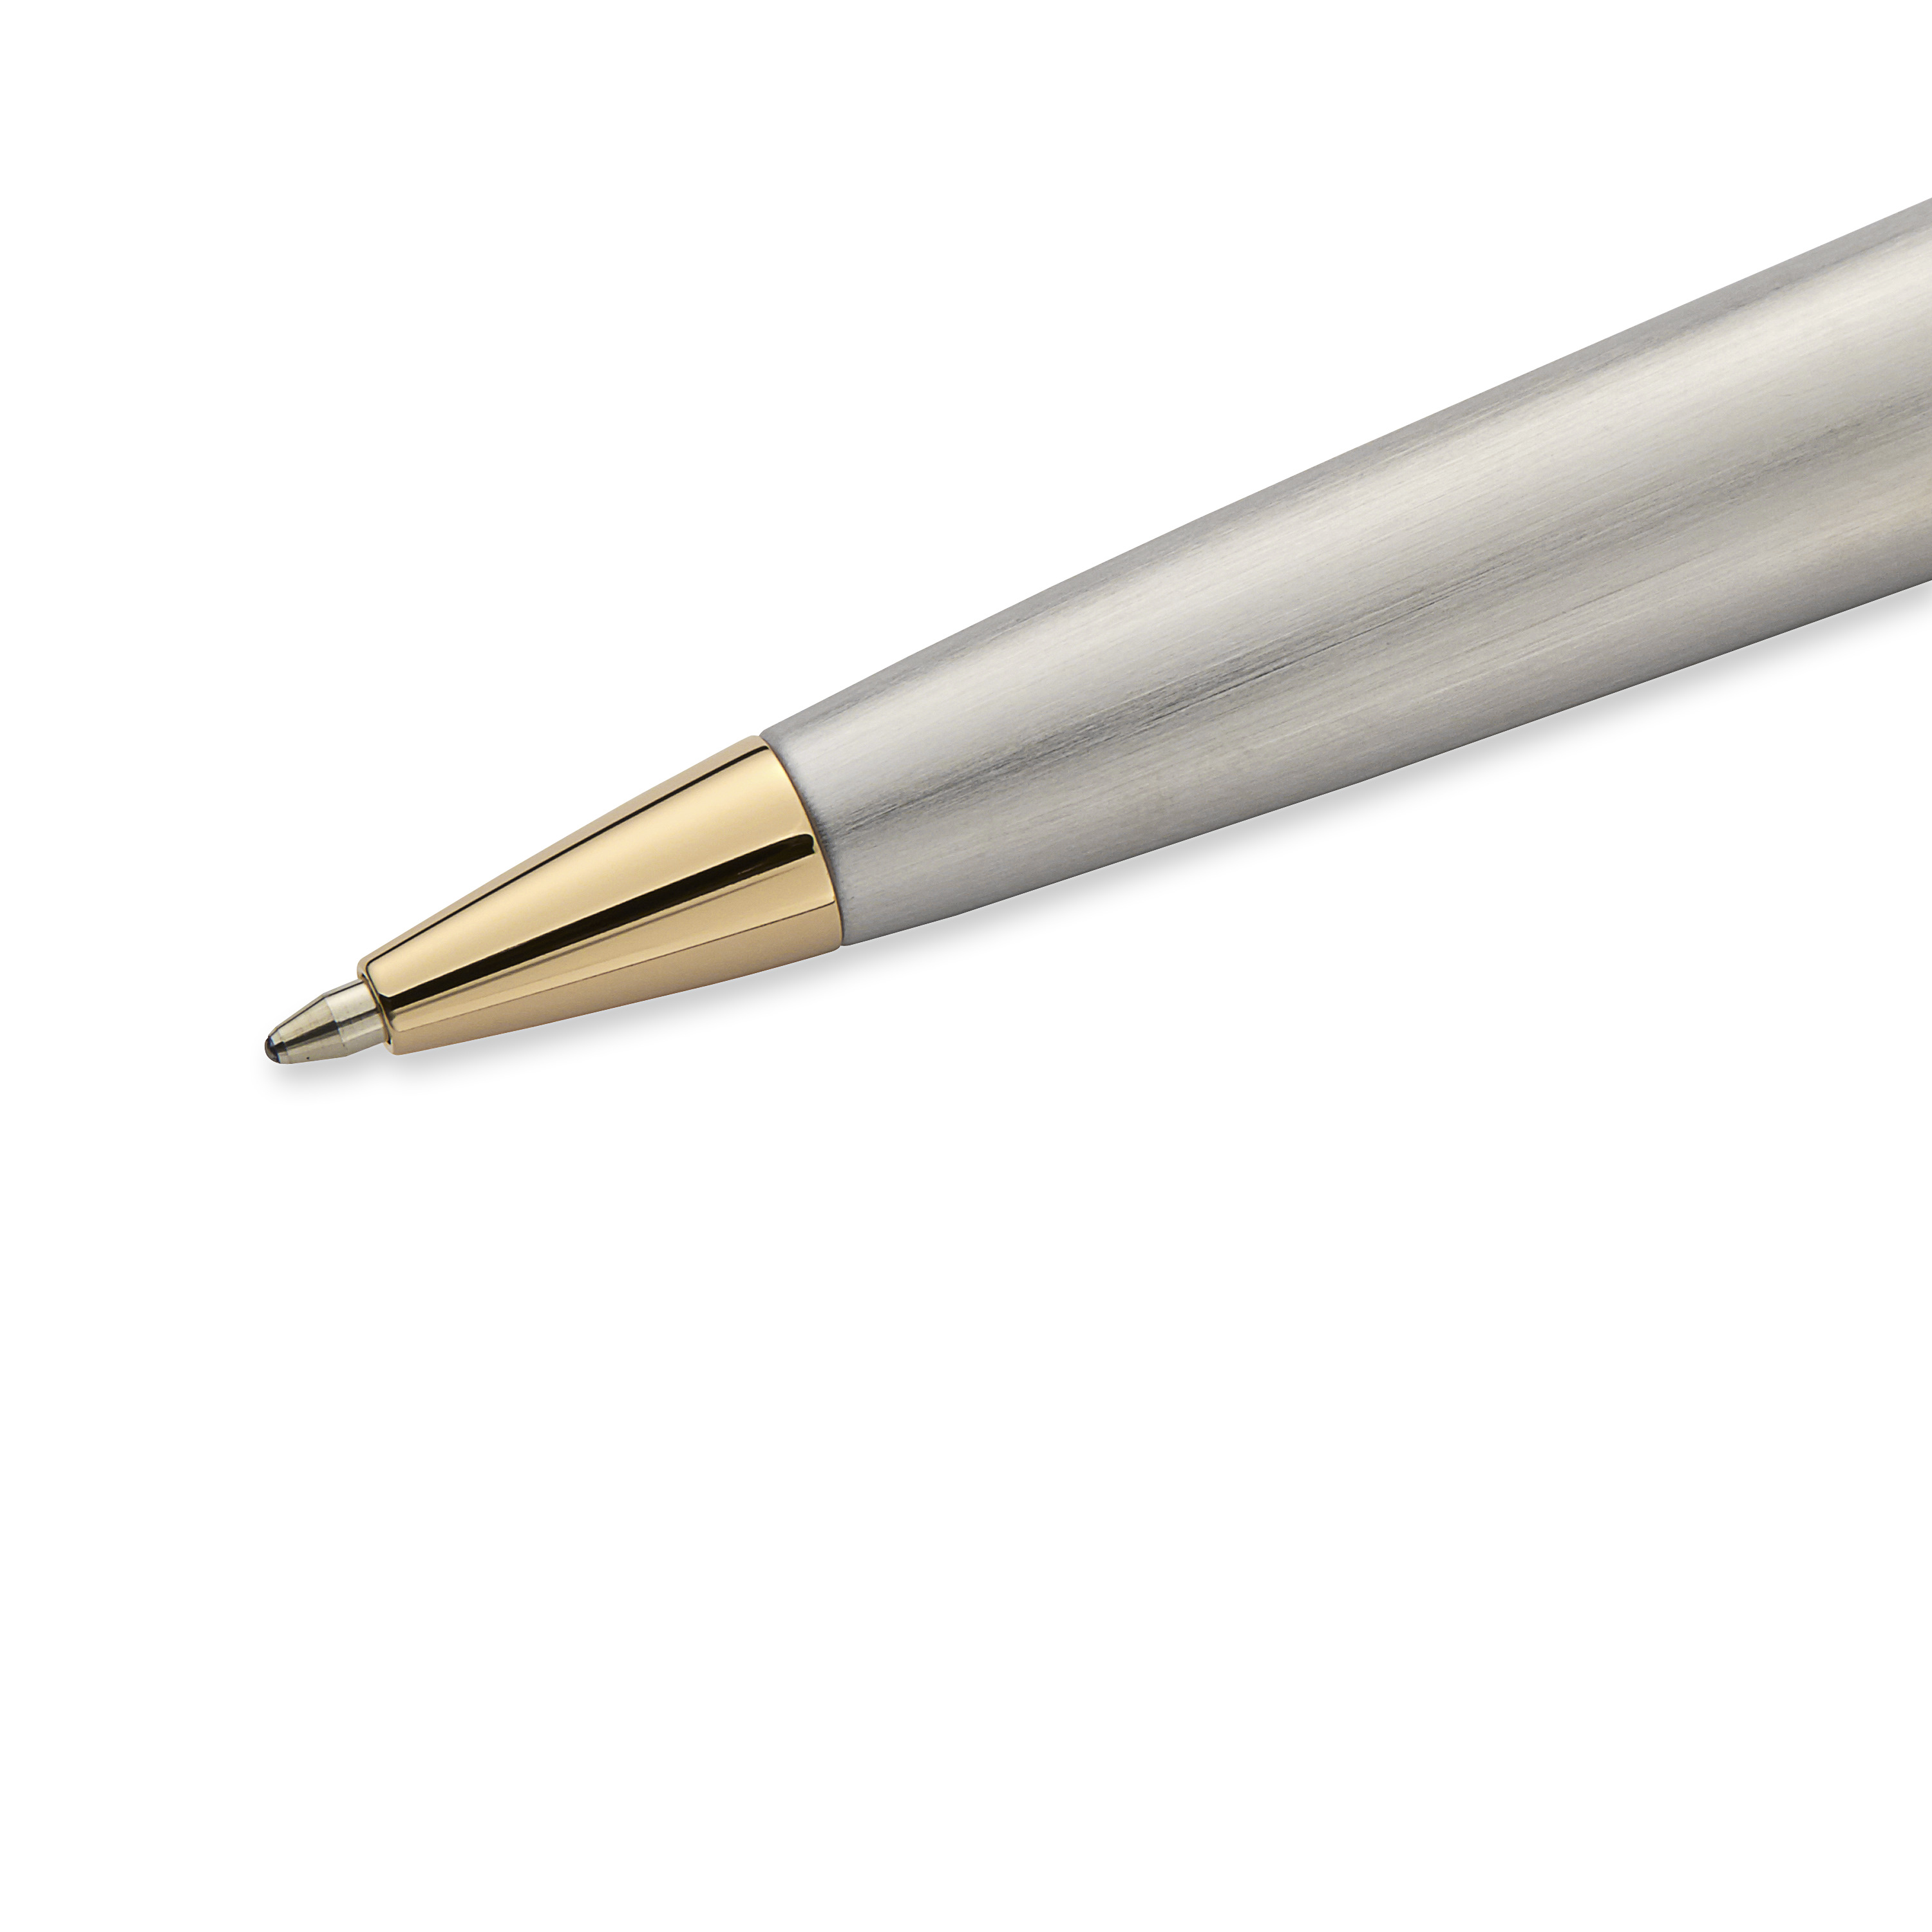 Waterman Expert Stainless Steel Gold Trim Ballpoint - Pencraft the boutique